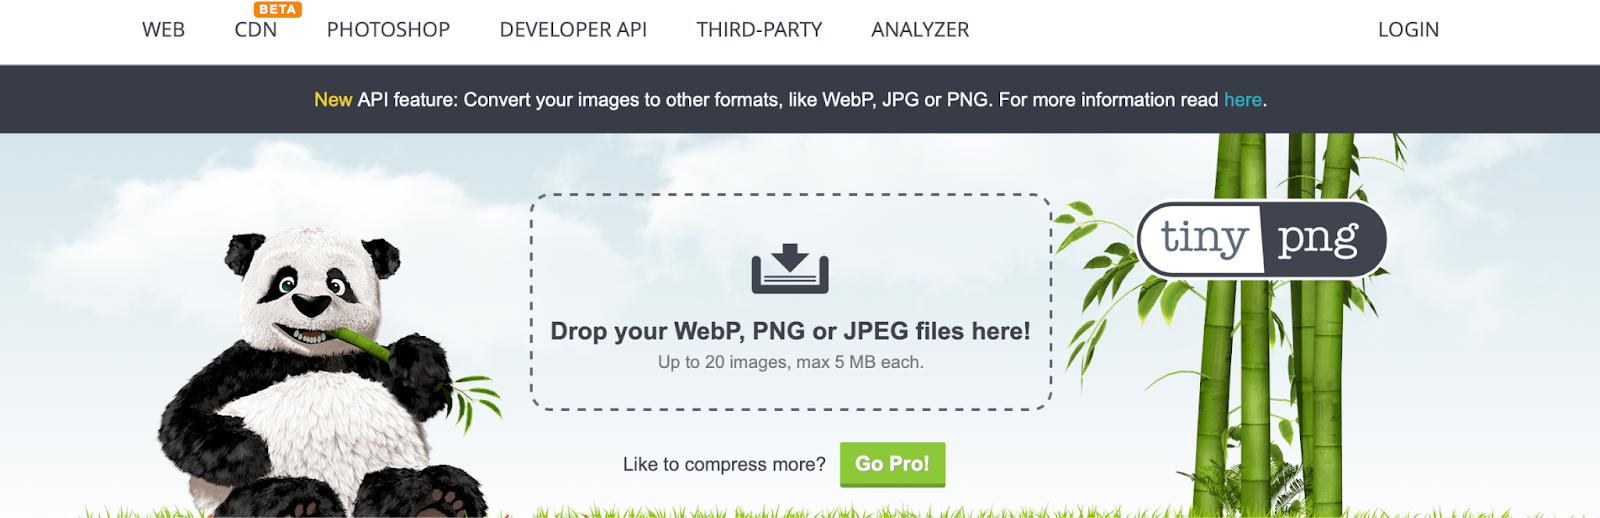 Online tool TinyPNG can help compress images for sizing.